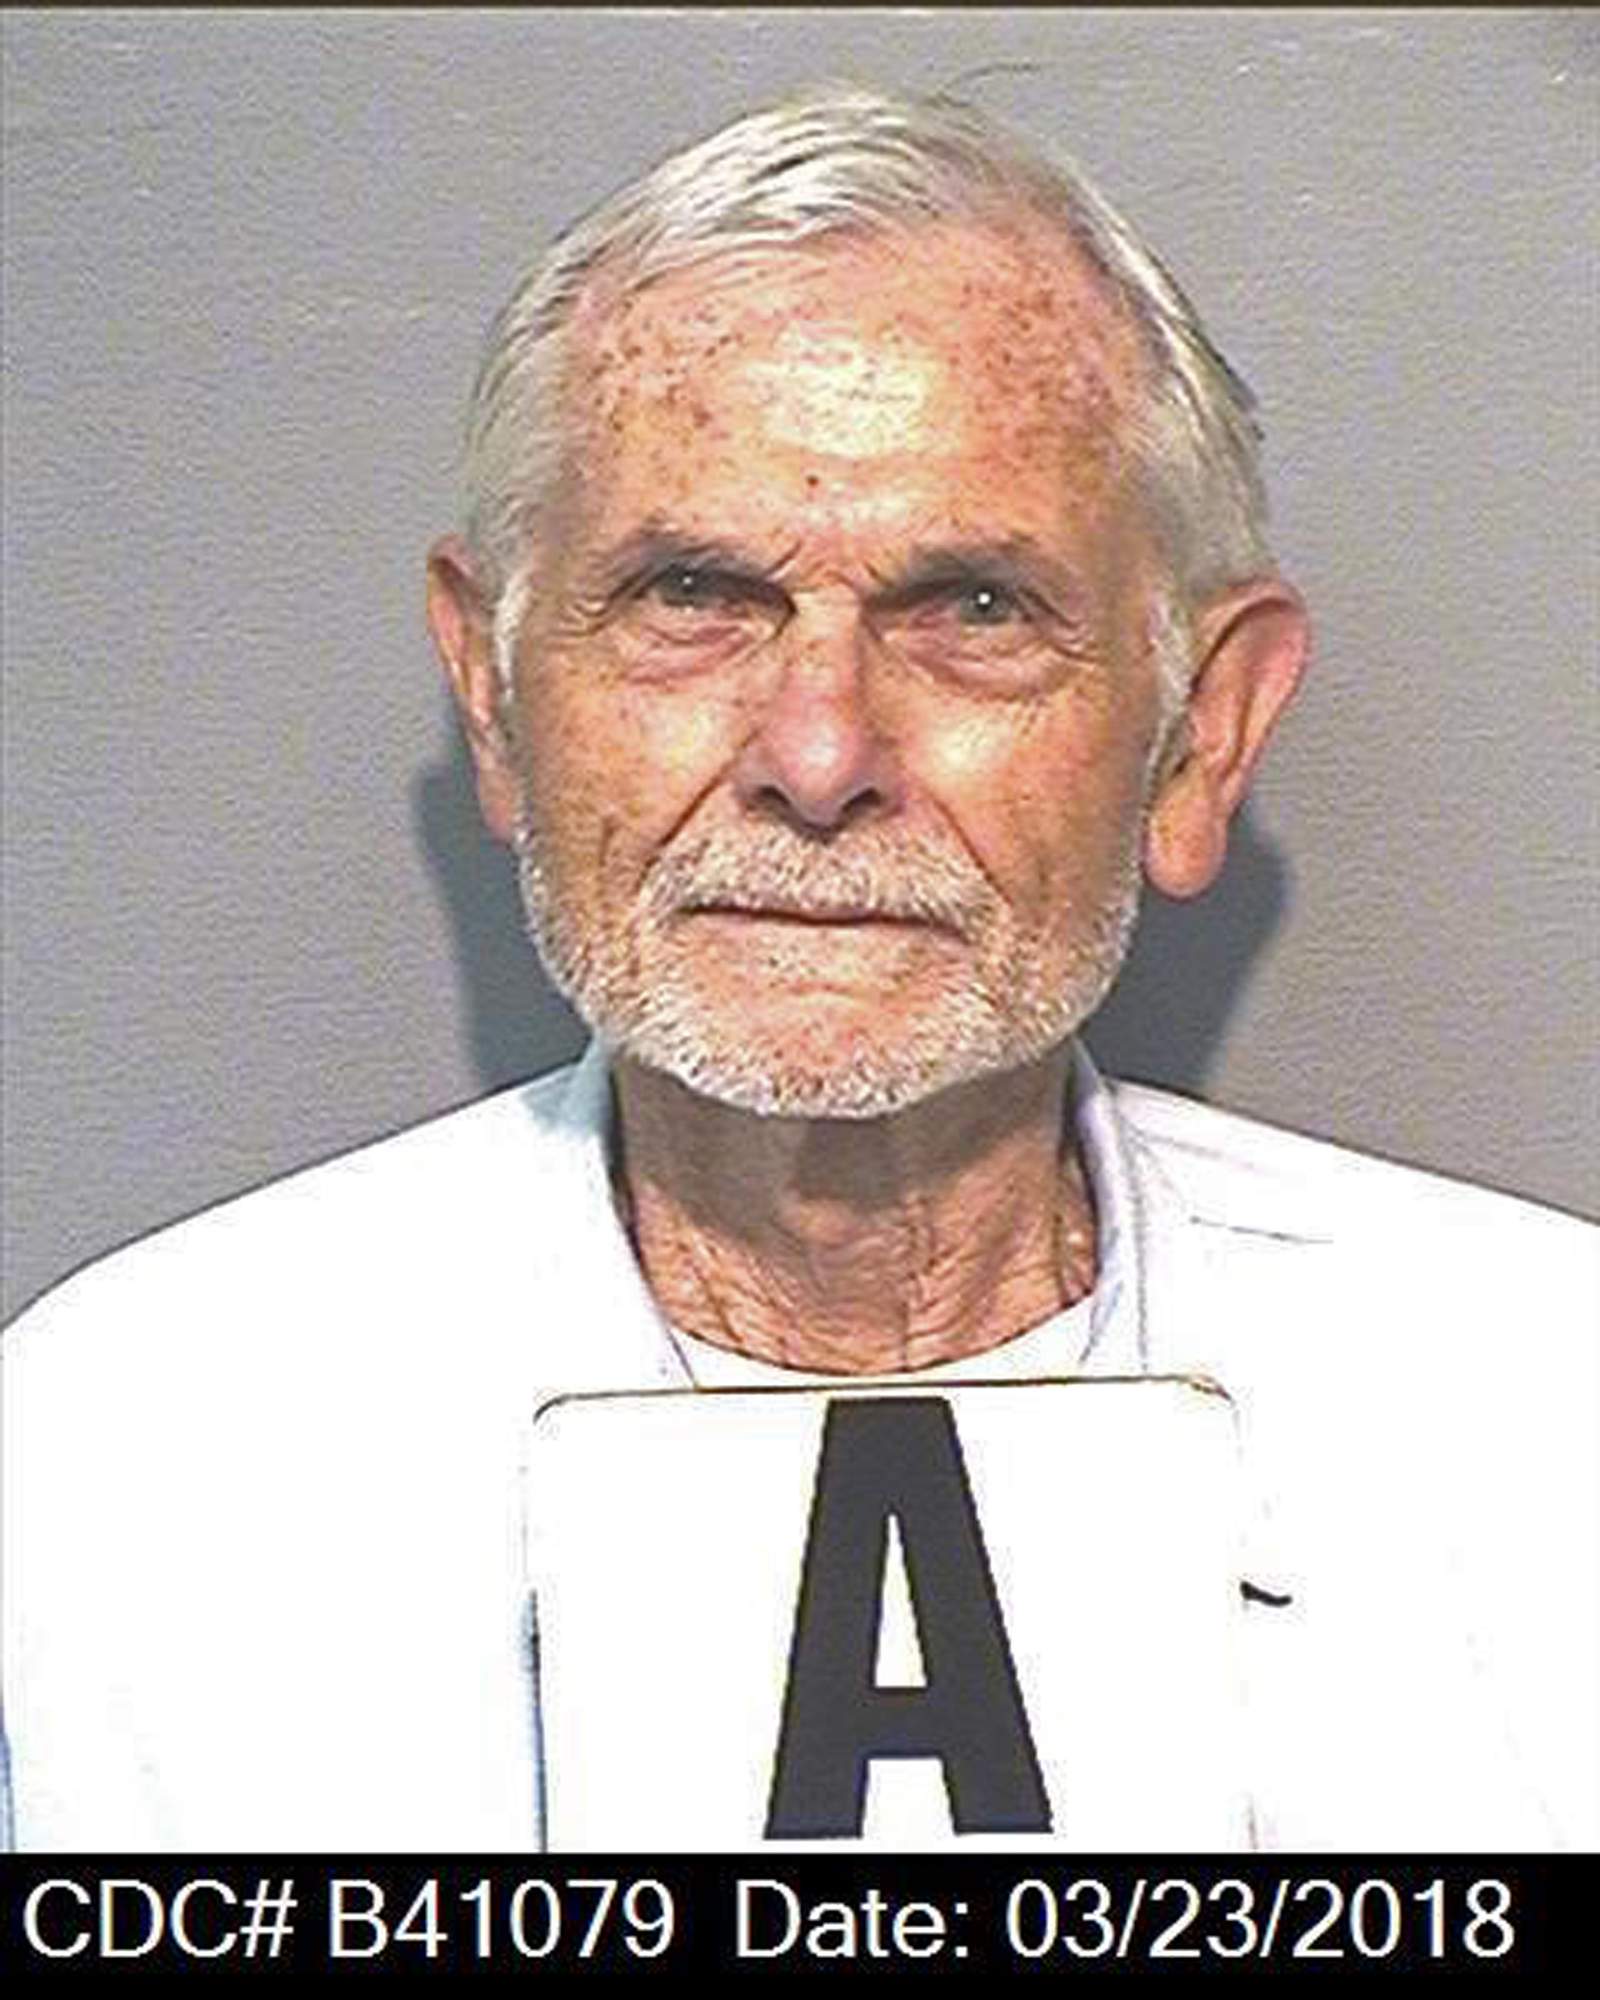 Parole rejected for Charles Manson follower after 50 years